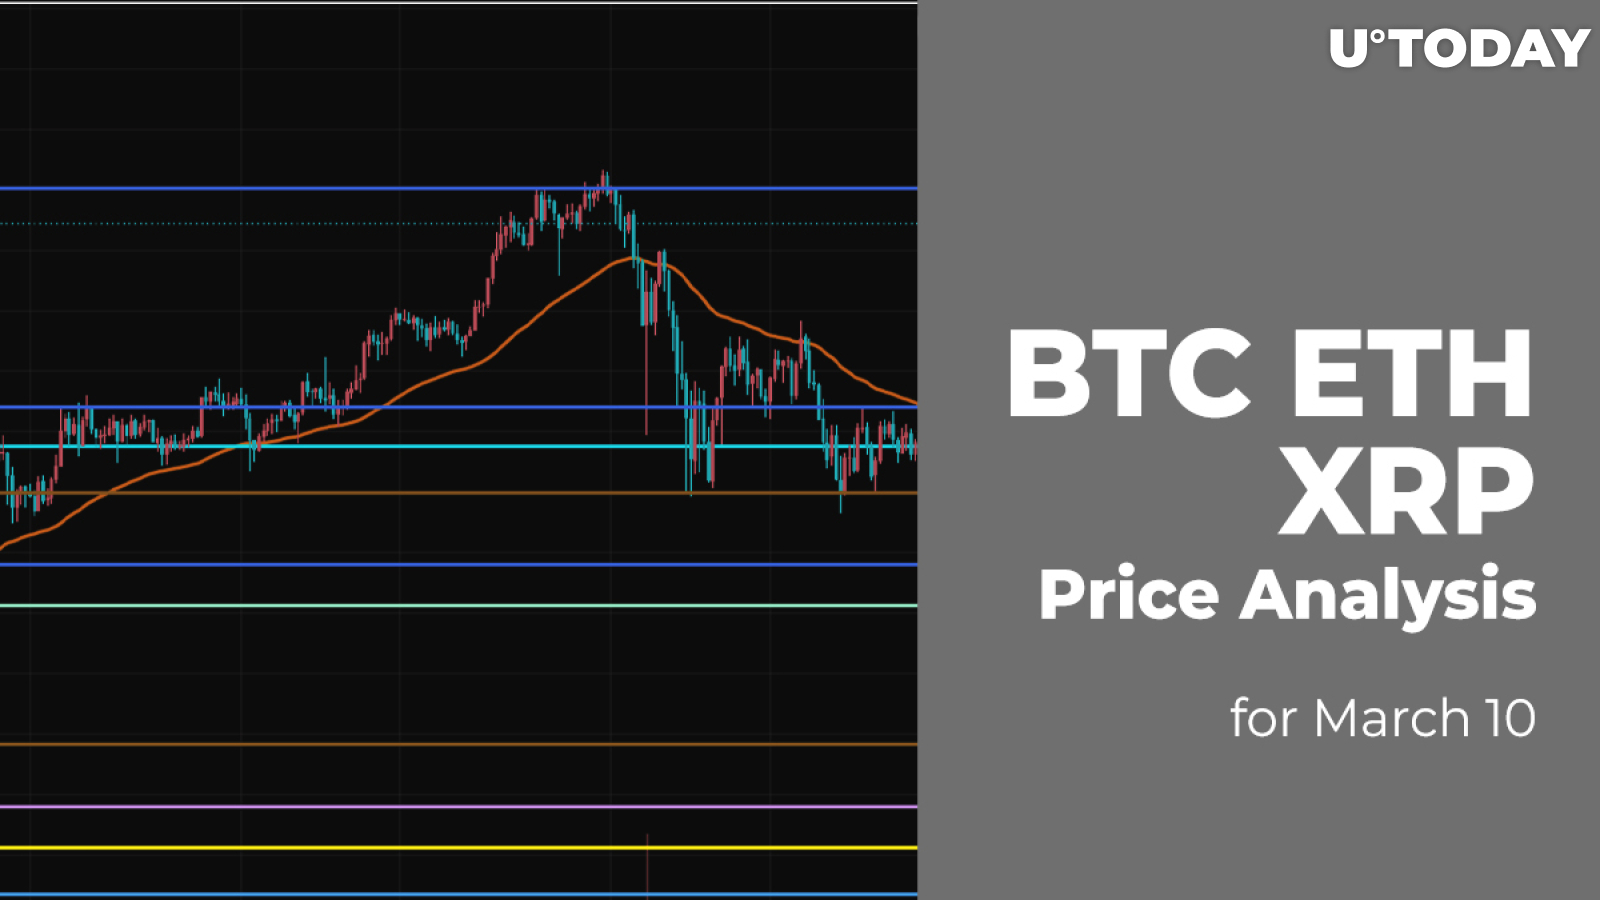 BTC, ETH and XRP Price Analysis for March 10